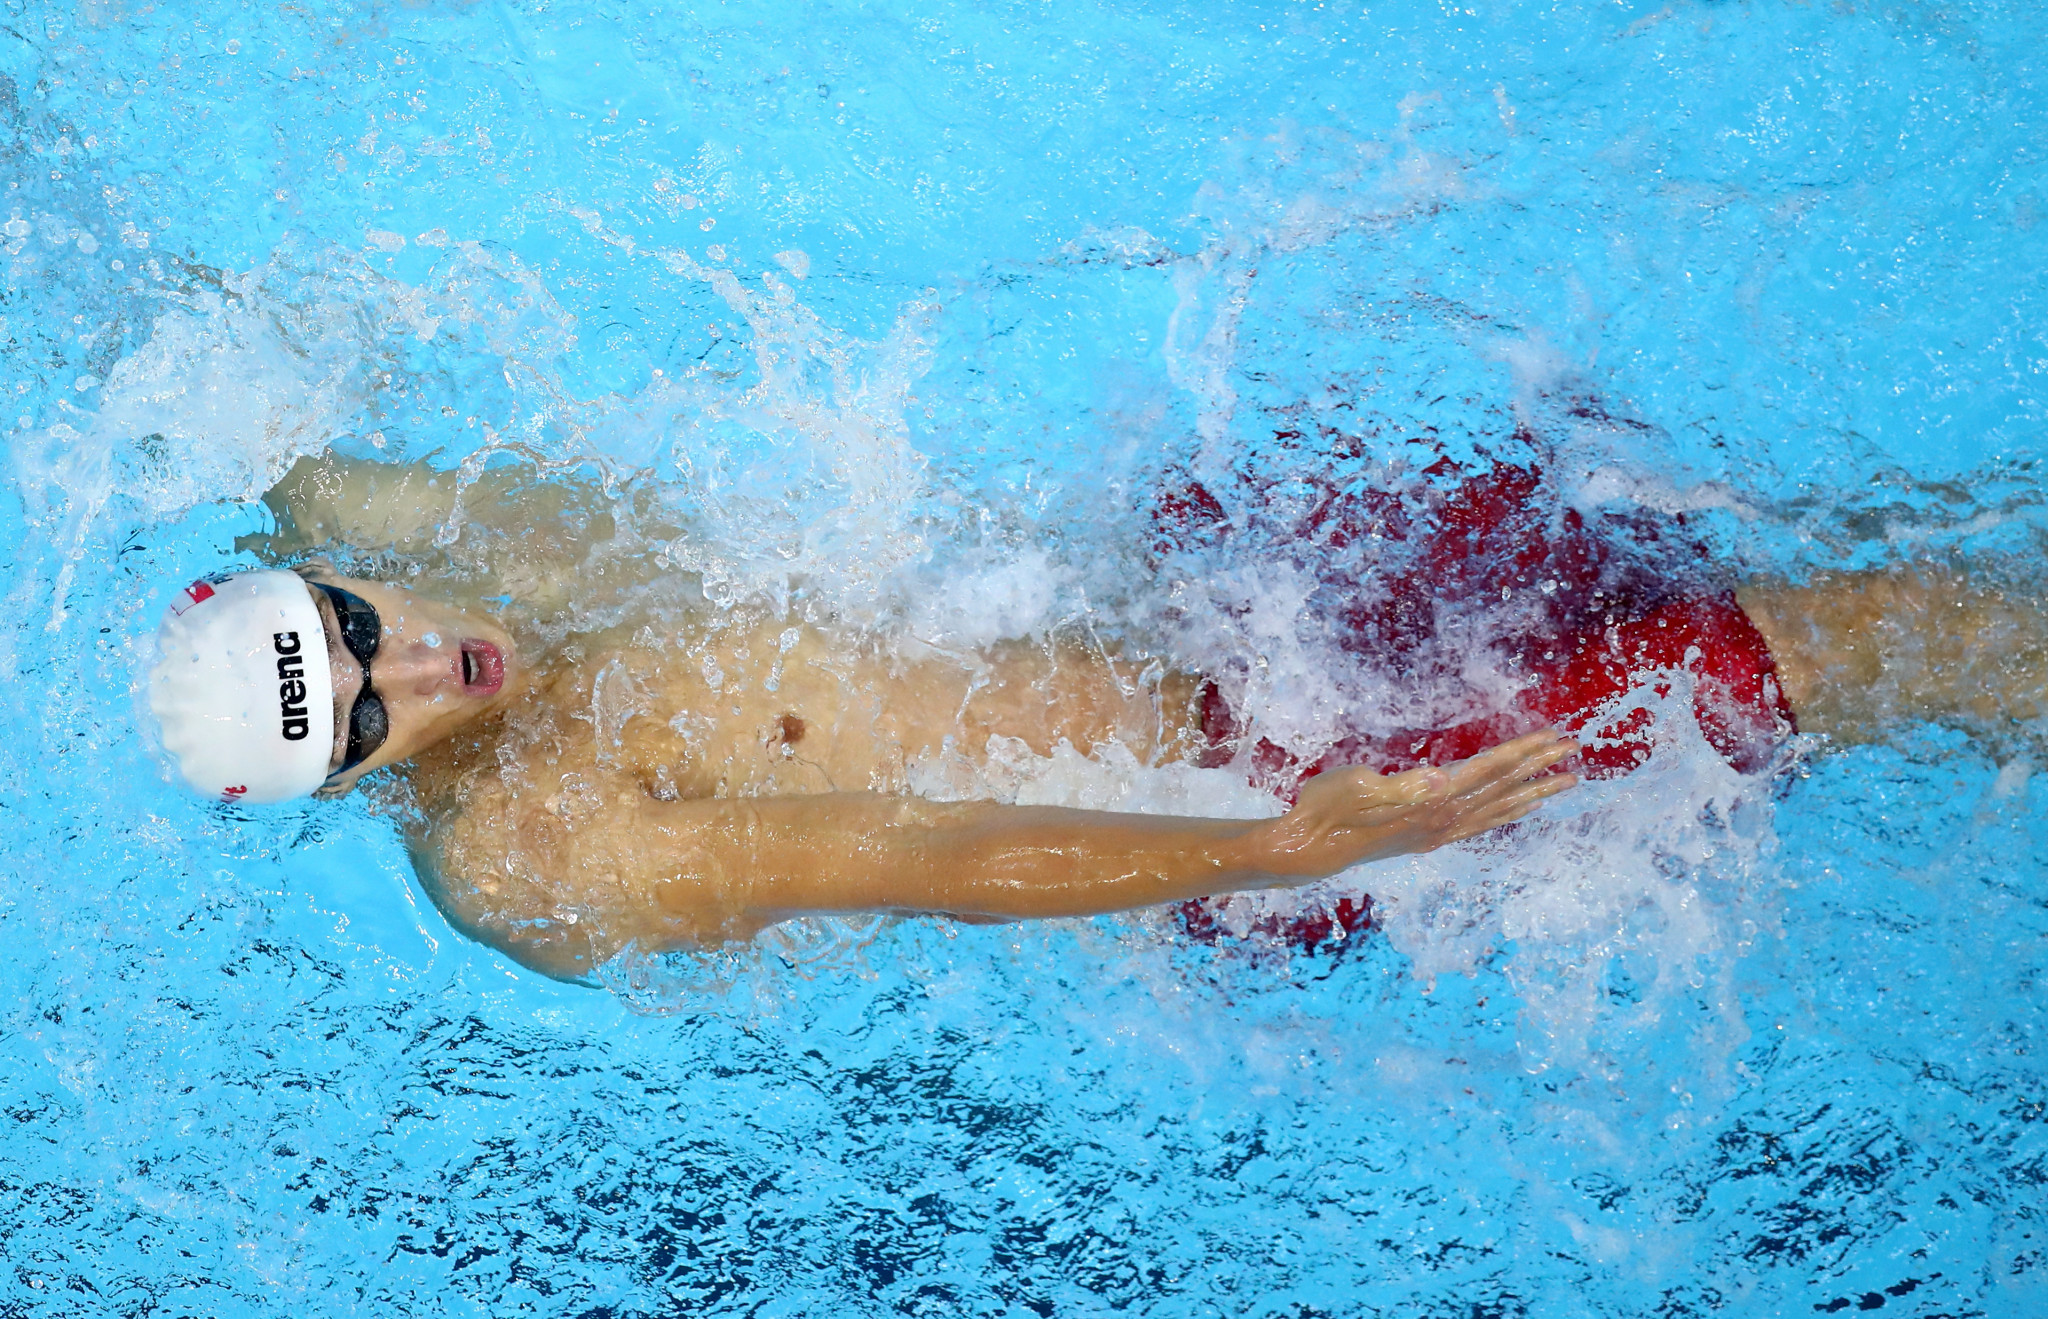 Ksawery Masiuk ended the 2022 FINA World Junior Championships as the most decorated male athlete ©Getty Images